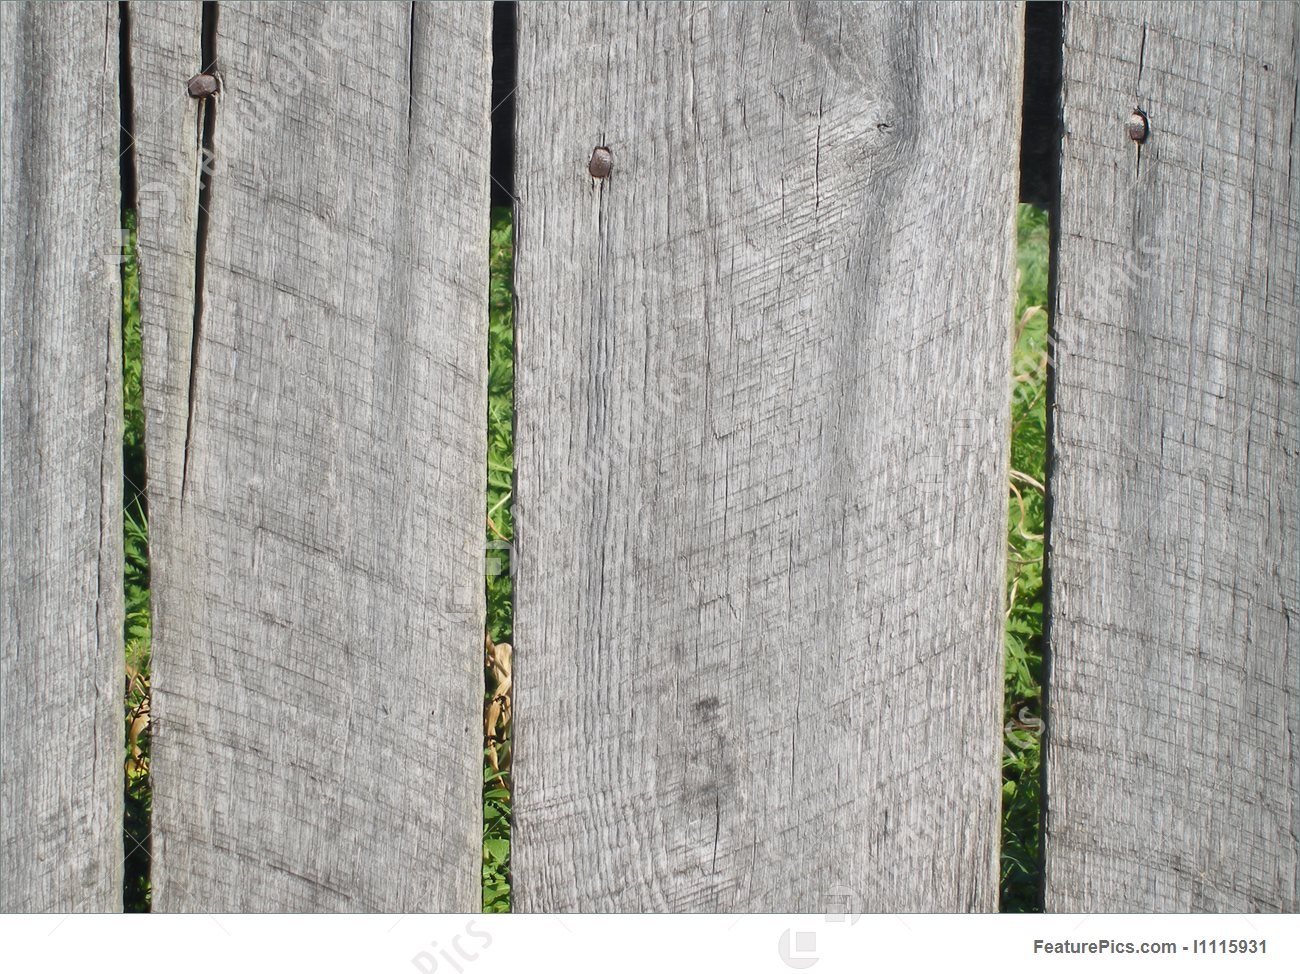 Wood Fence And Wooden Panel, Nail Or Screw In An Old - Grass - HD Wallpaper 